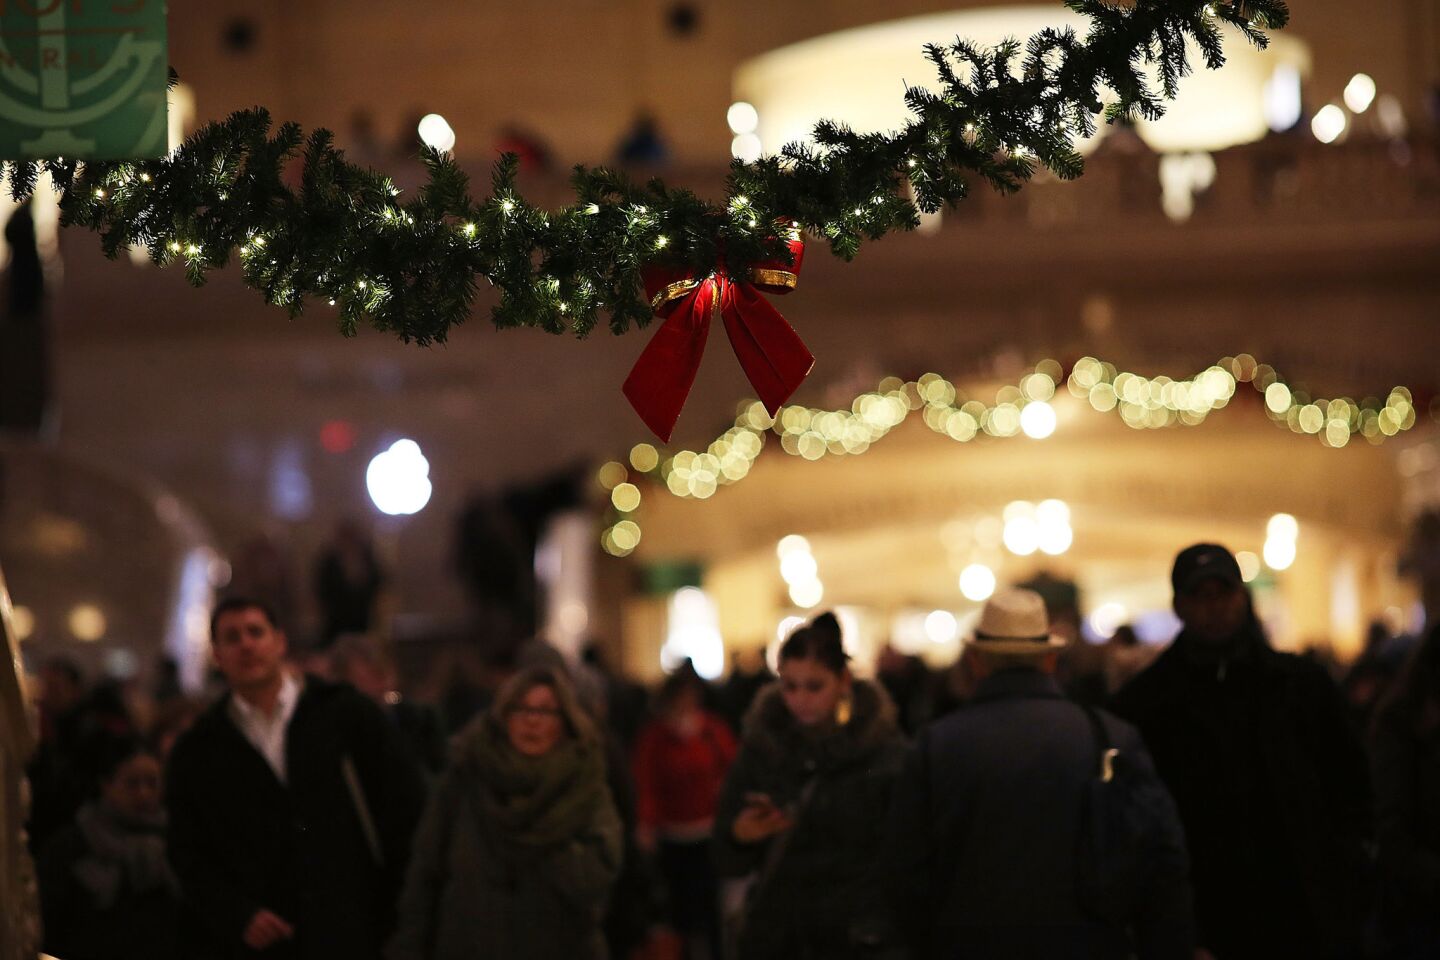 Even busy commuters will take notice of the holiday decorations in Grand Central Terminal.